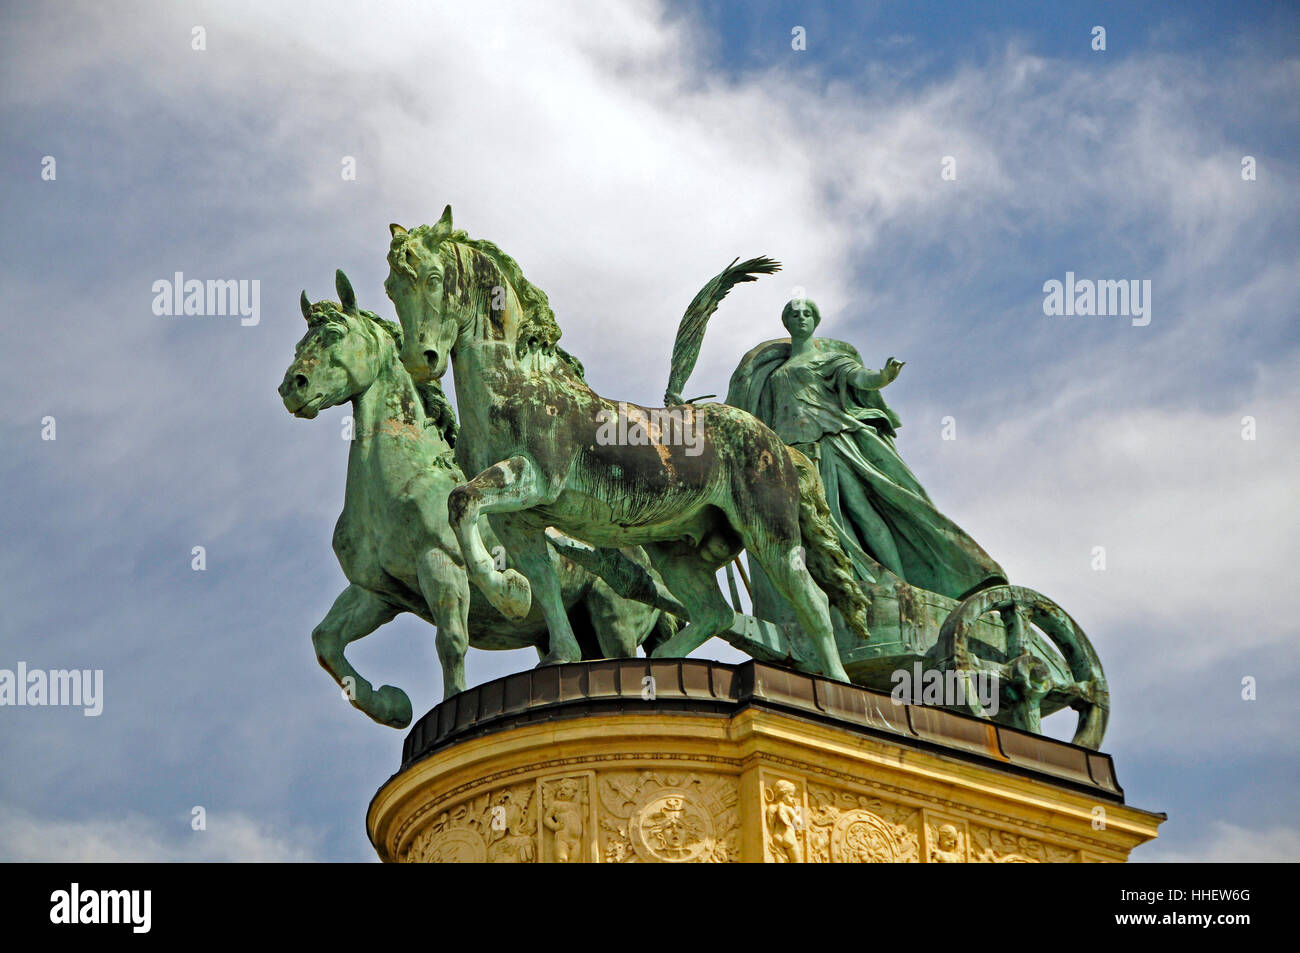 monument, detail admission, horse, horses, war, budapest, peace, hungary, Stock Photo